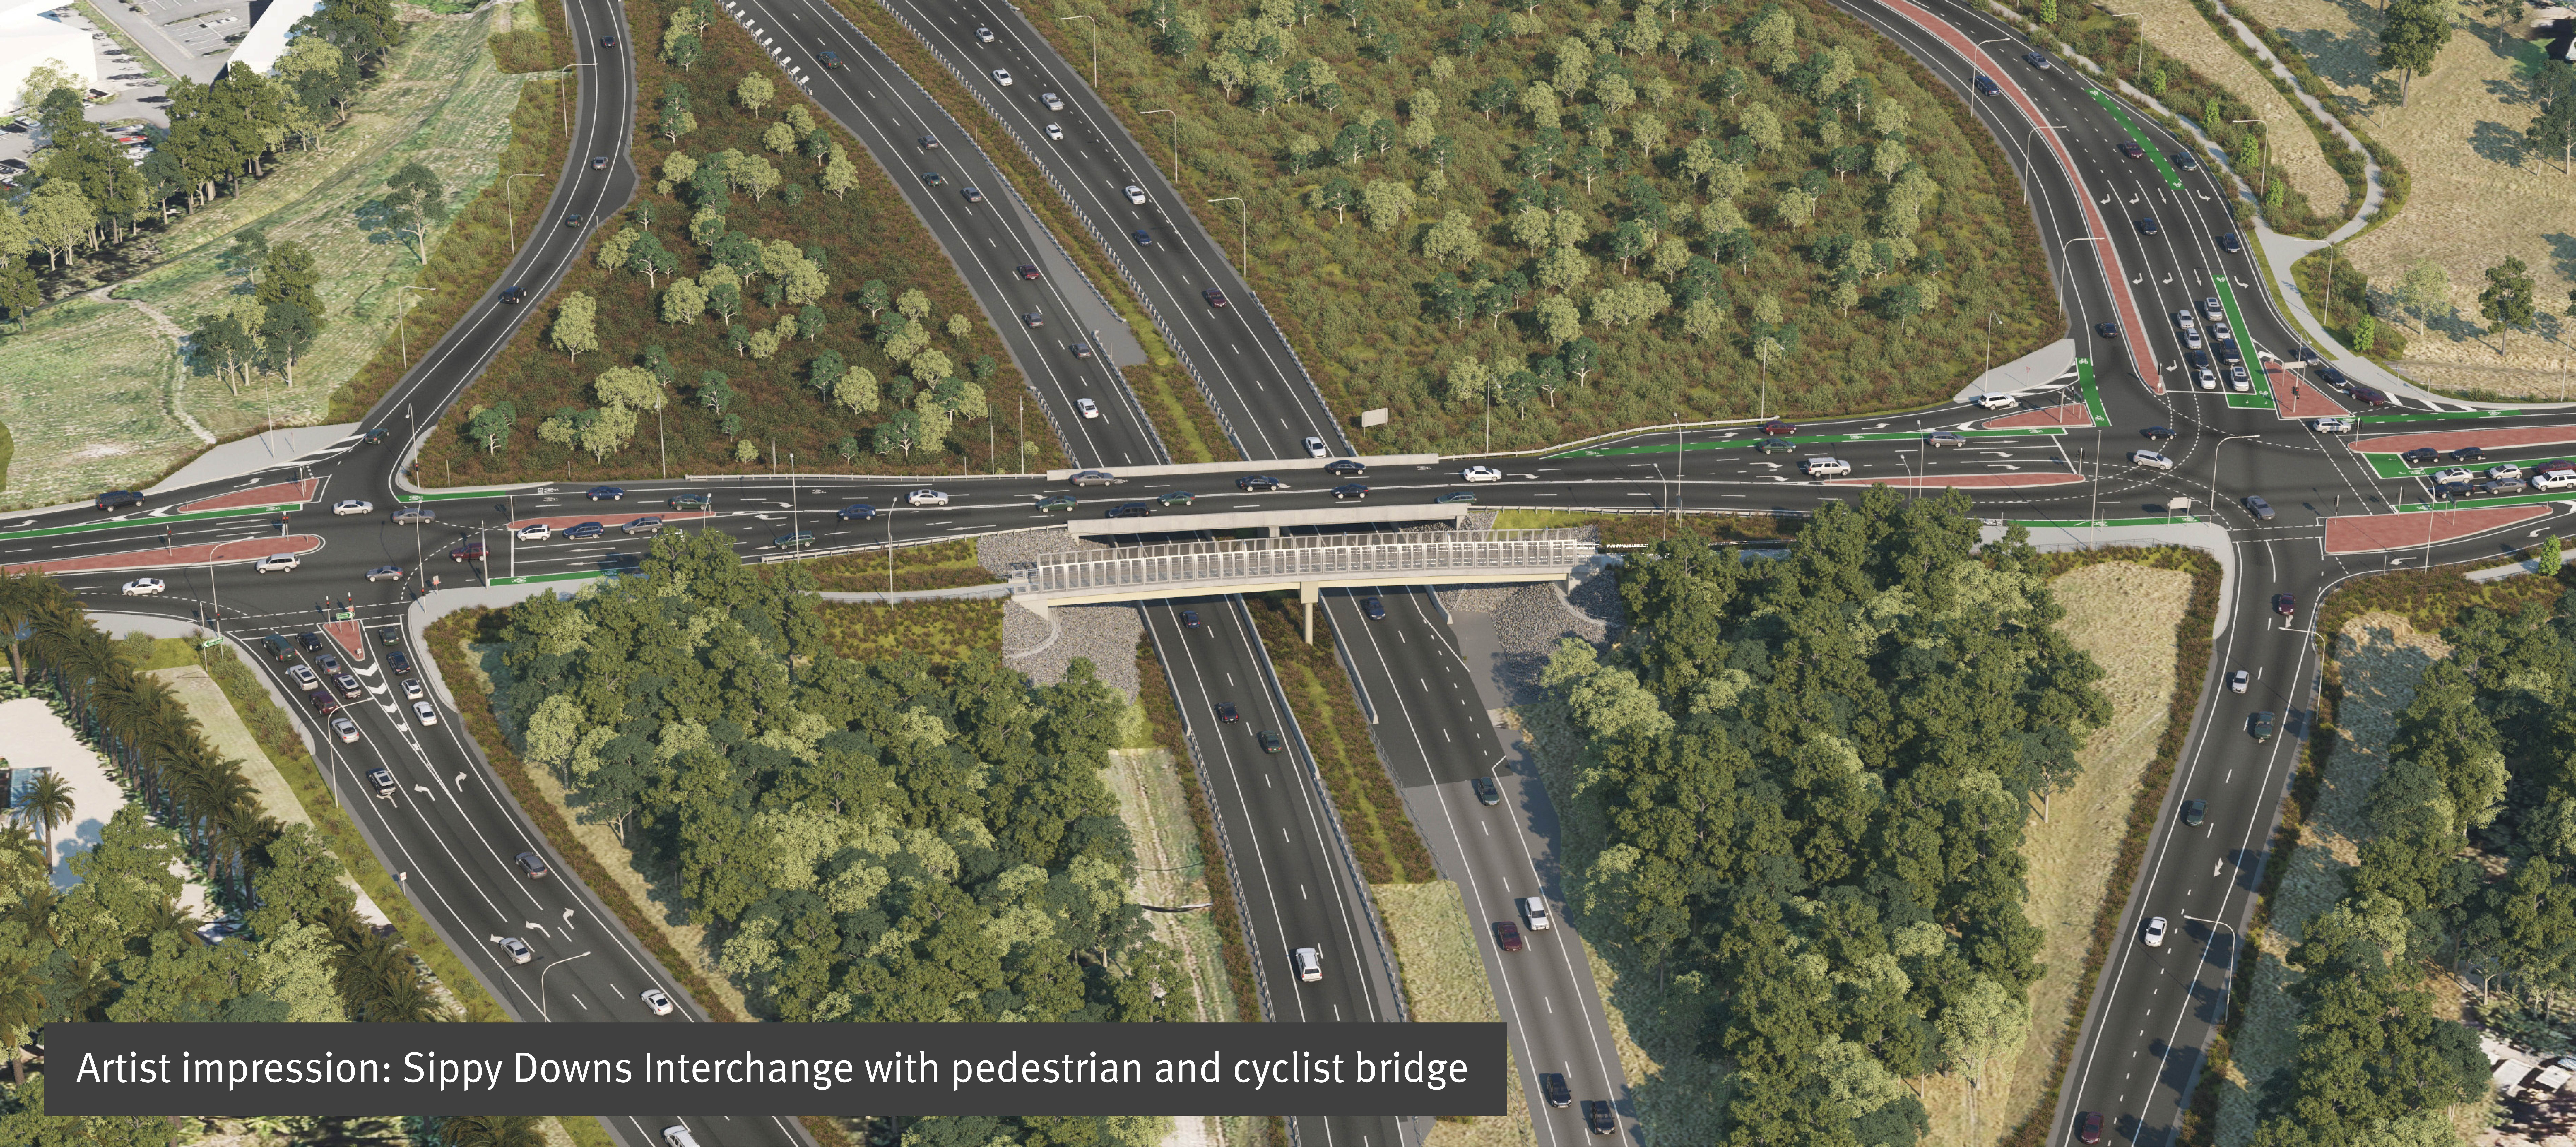 Sippy Downs Interchange with pedestrian and cyclist bridge